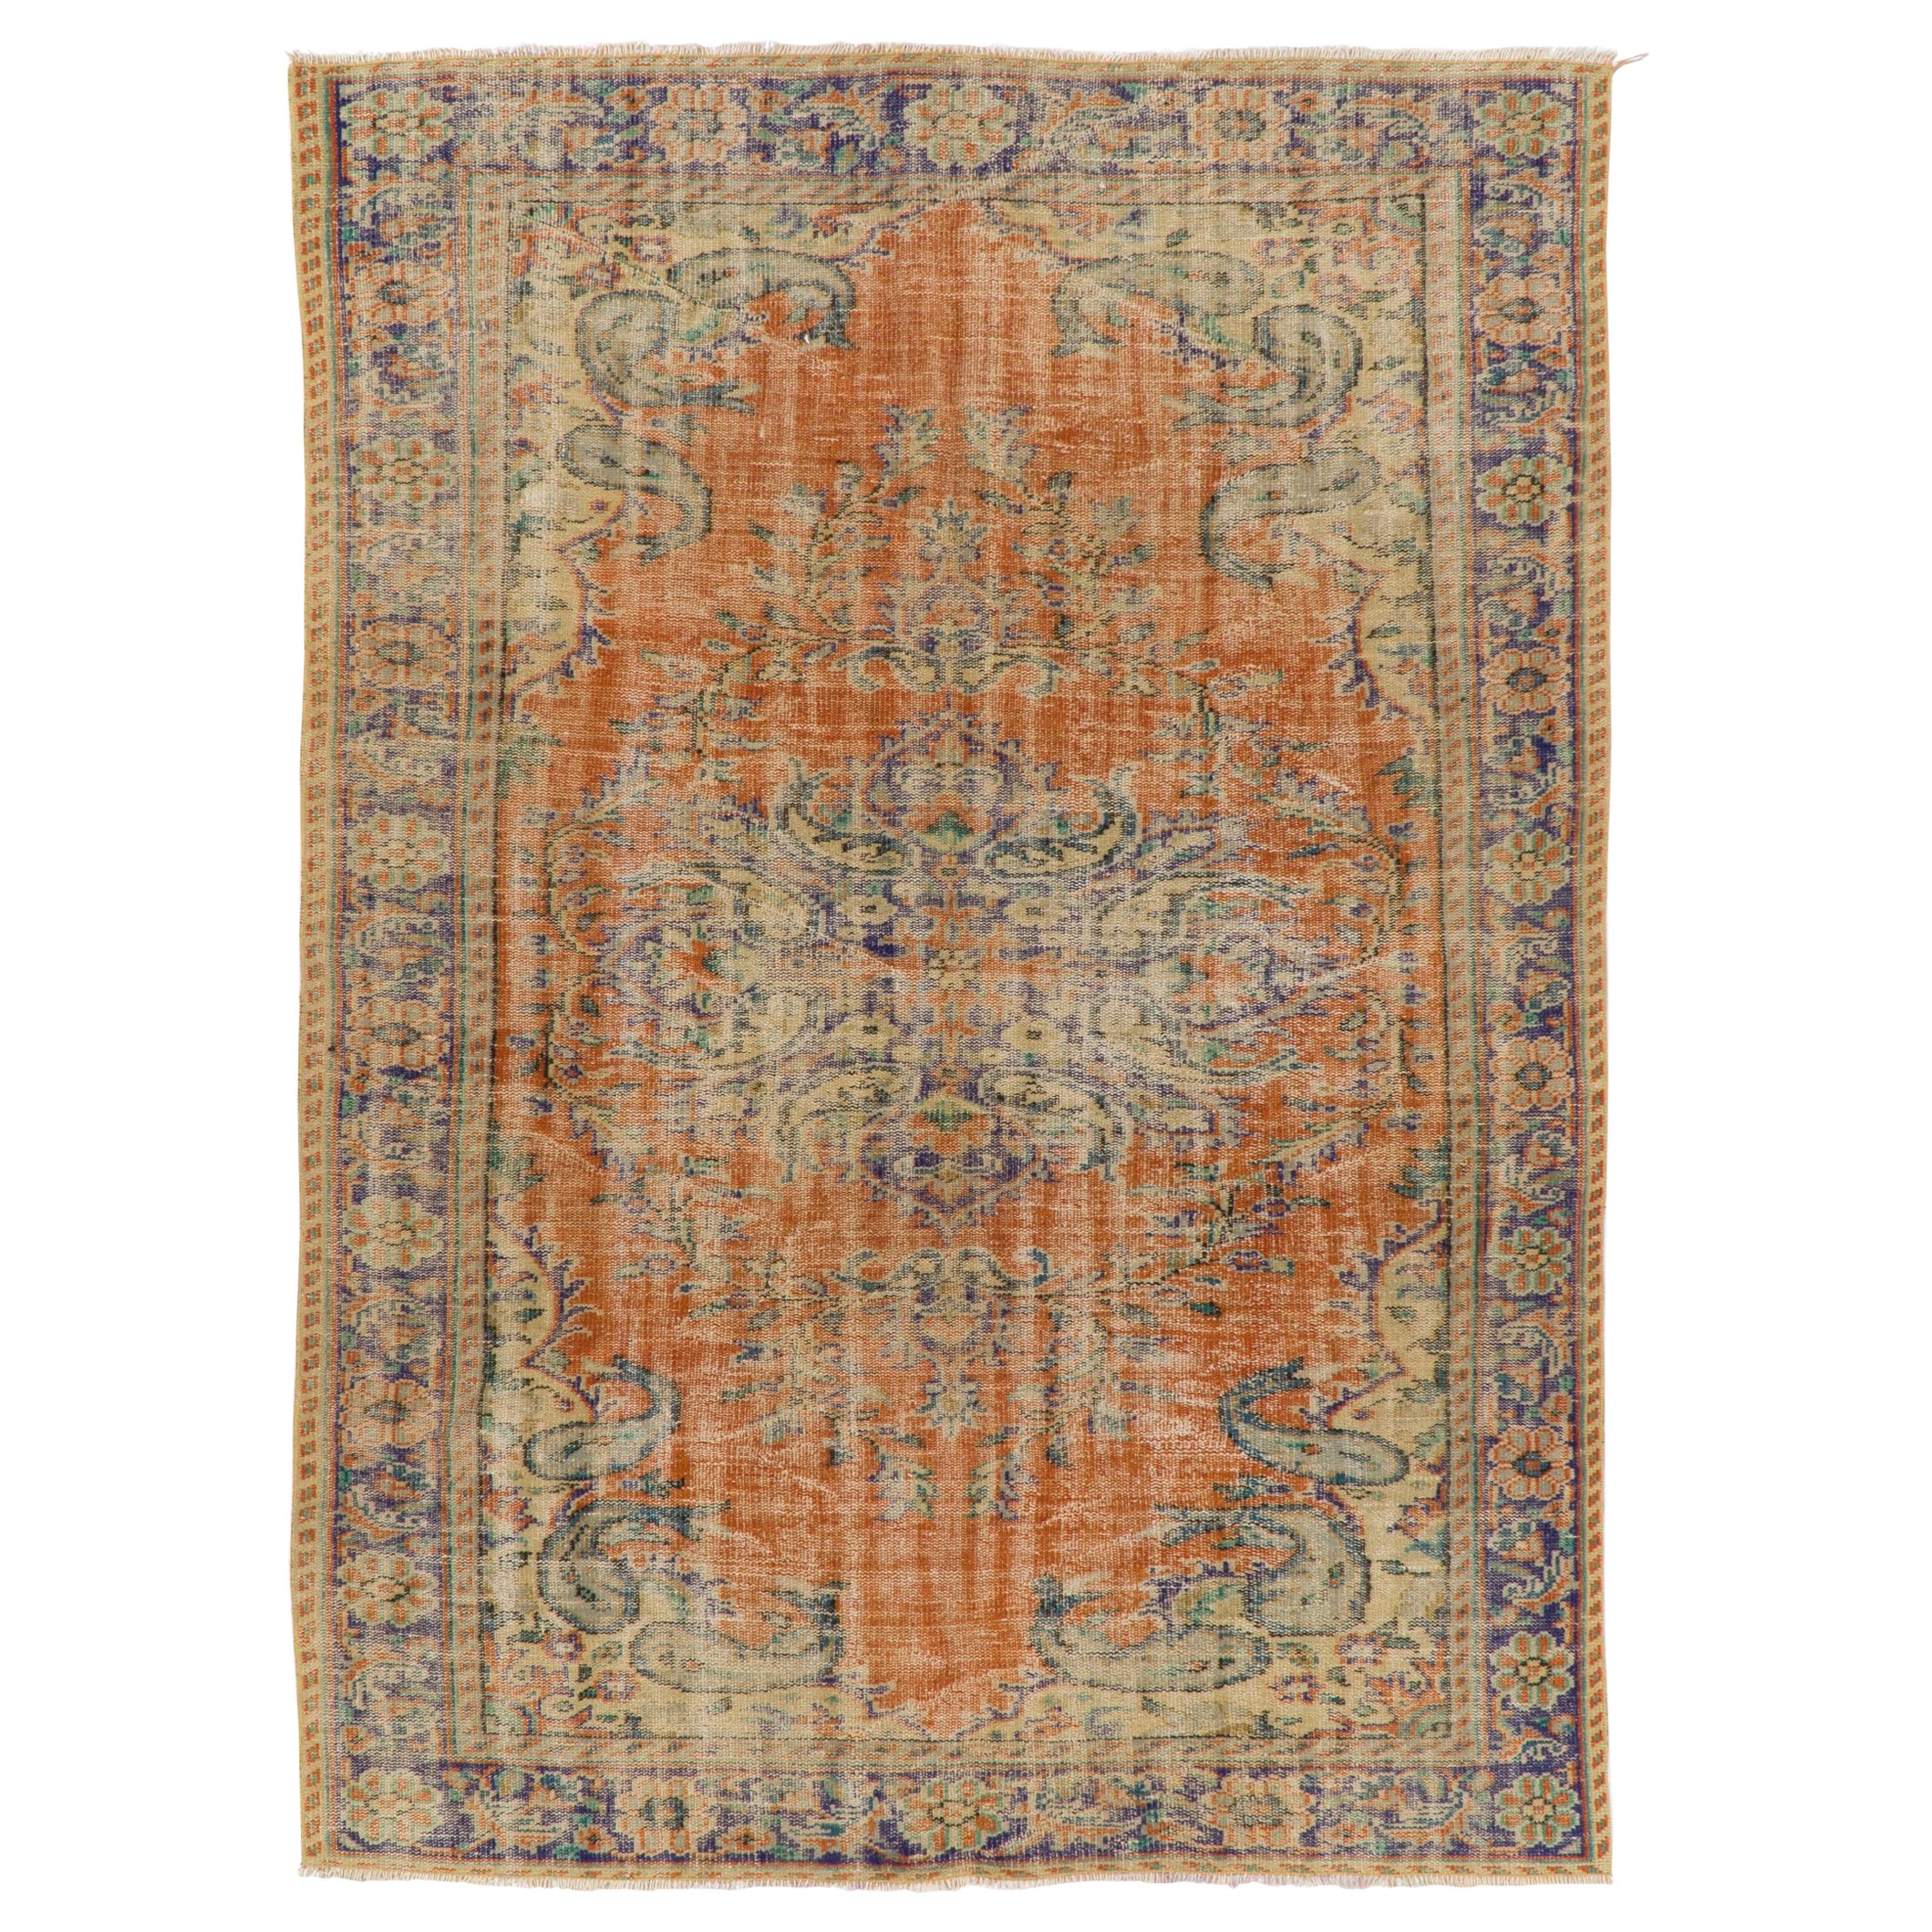 6.4x9 ft Mid-20th Century Handmade Turkish Oushak Area Rug Made of Organic Wool For Sale